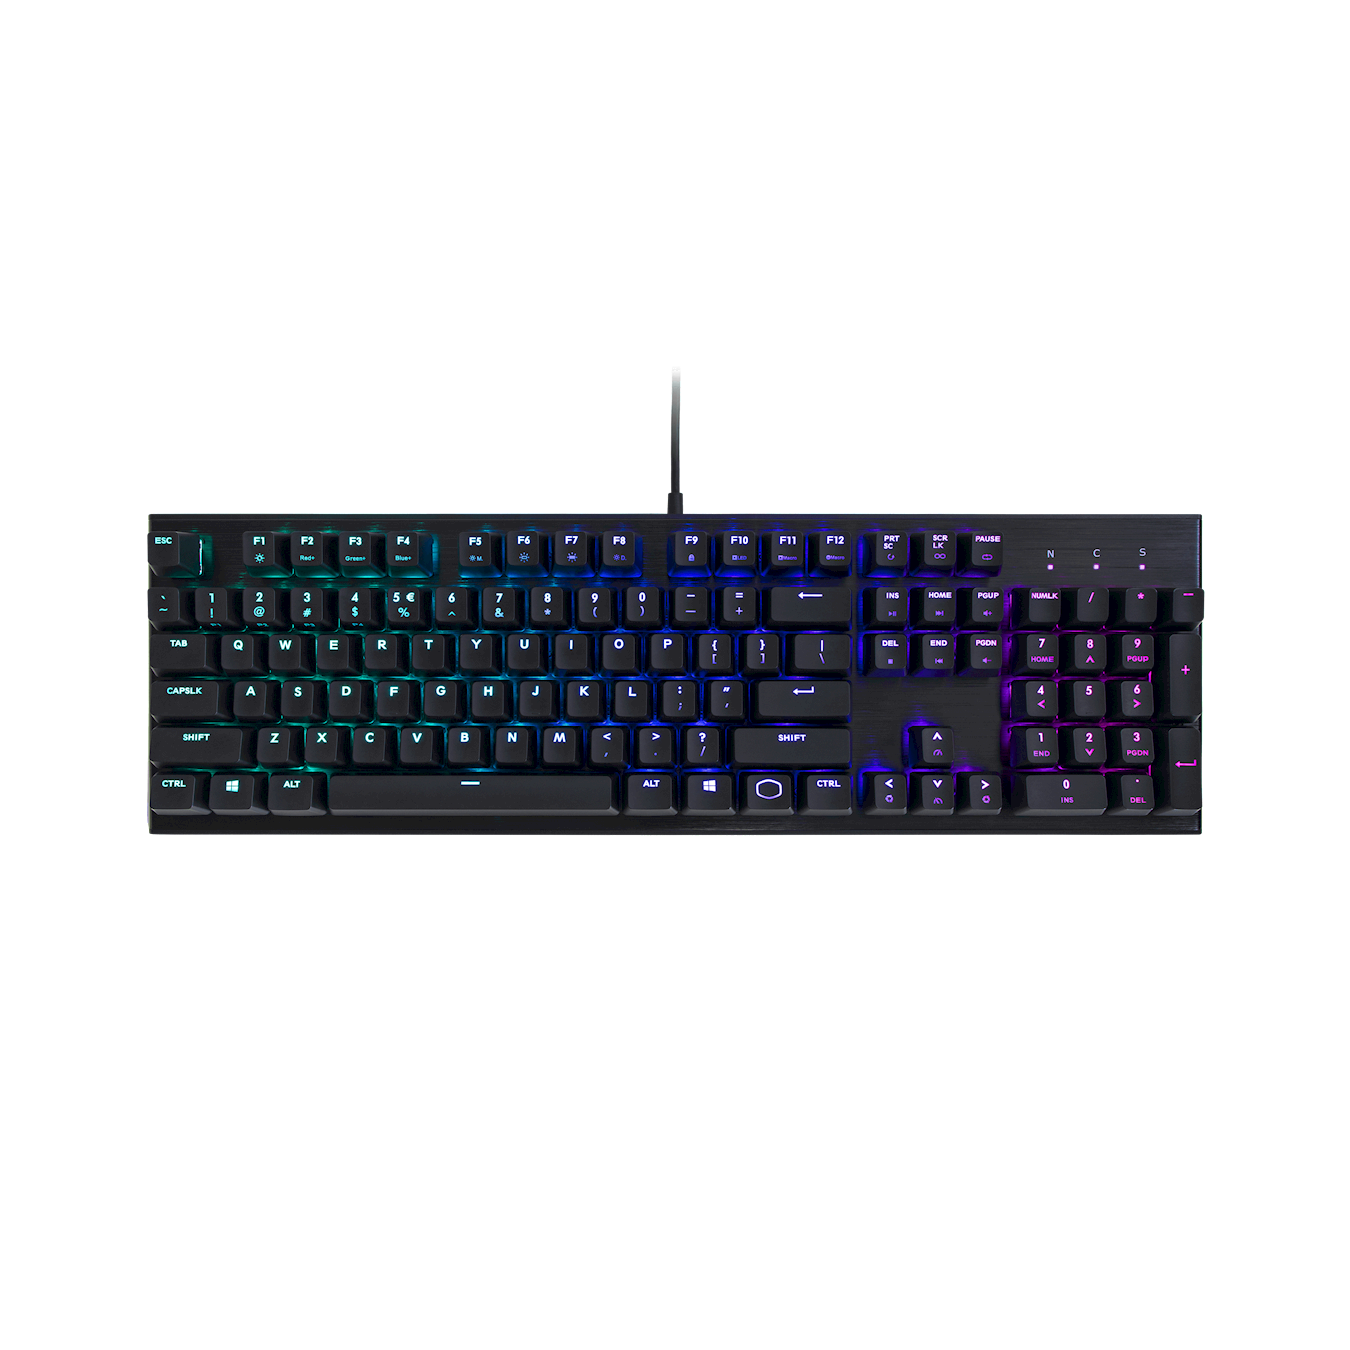 CK552 RGB Mechanical Gaming Keyboard - rated for a 50 million+ lifepan to never let you down in the heat of battle